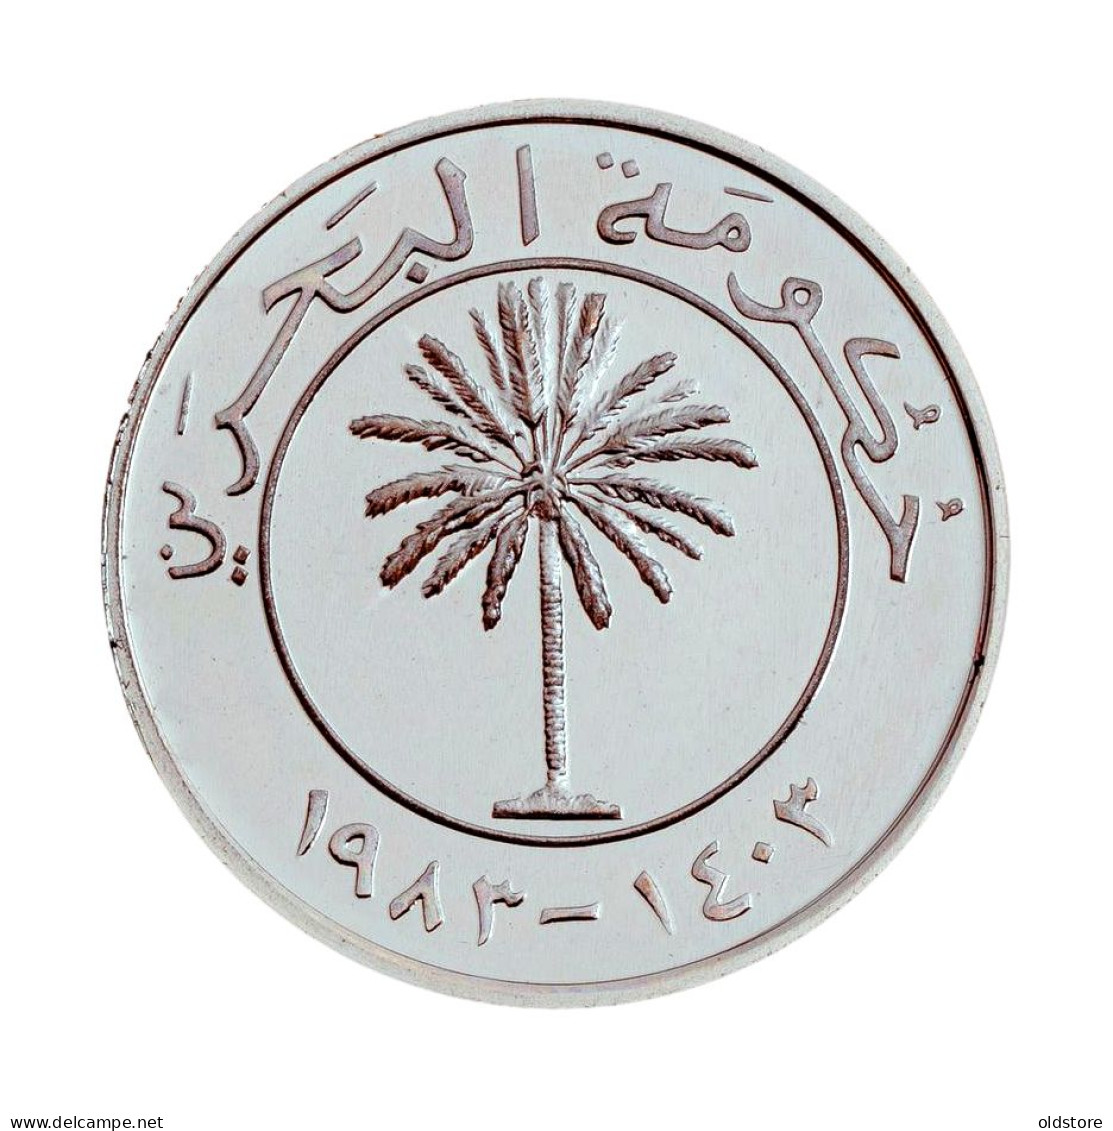 Bahrain Coins - MINT (1 Fils ) Proof  -  Sterling Silver - ND 1983 - Mint Silver Coins - Bahrein